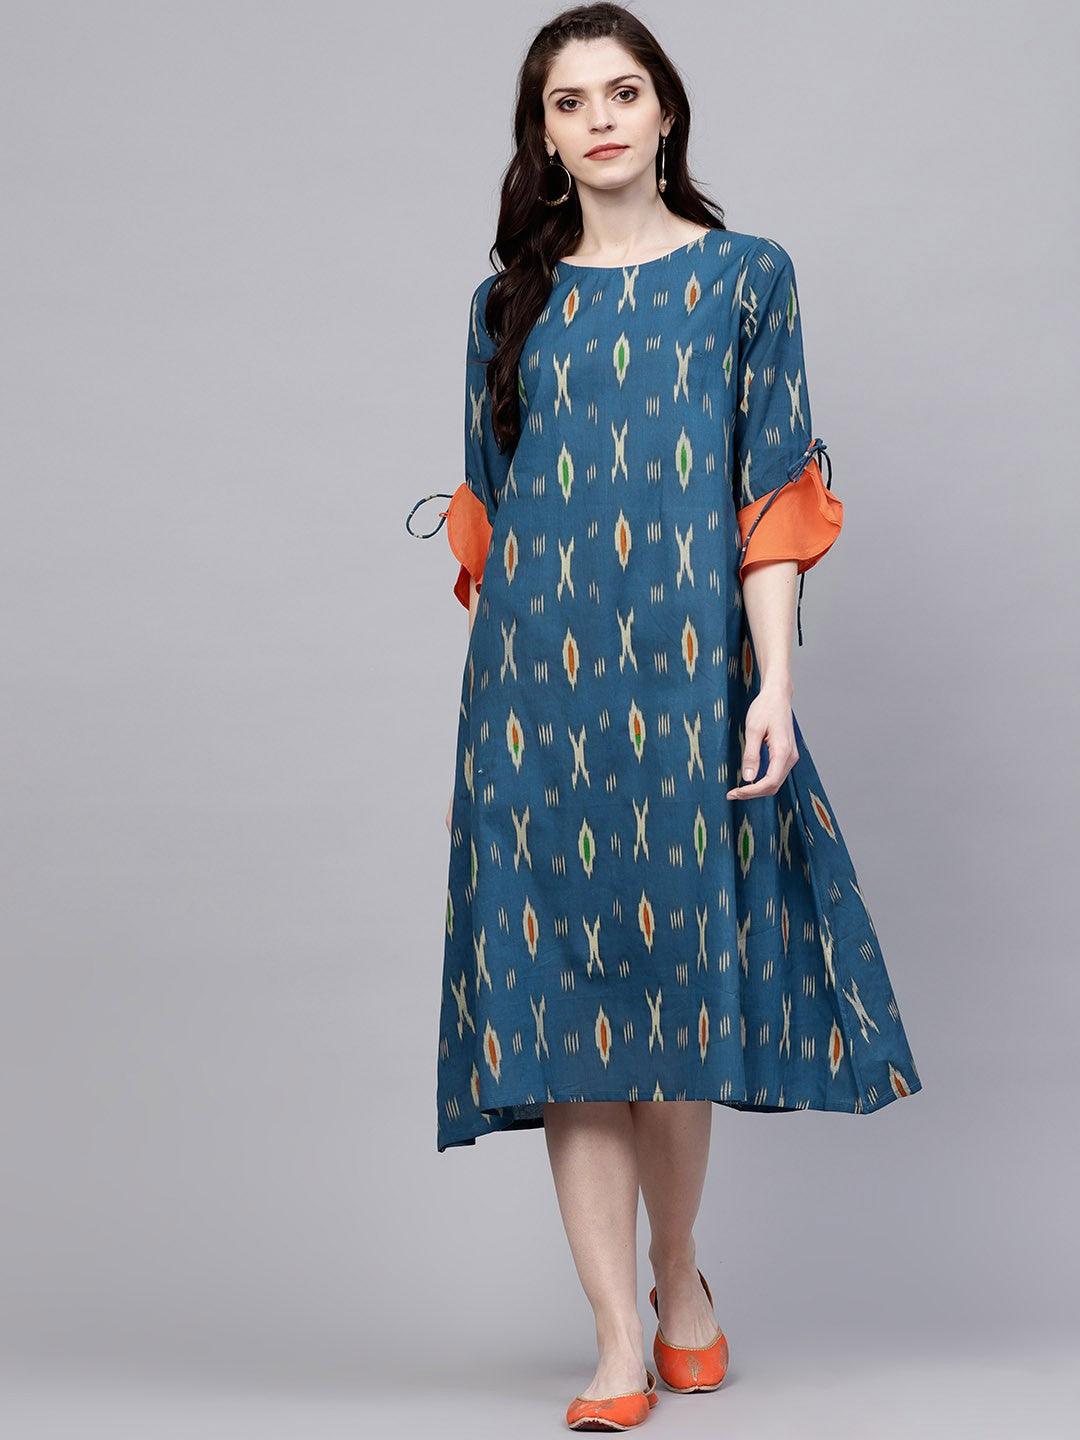 Blue Ikat Print A-Line Dress With Ruffle Sleeve (Fully Stitched) - Znxclothing